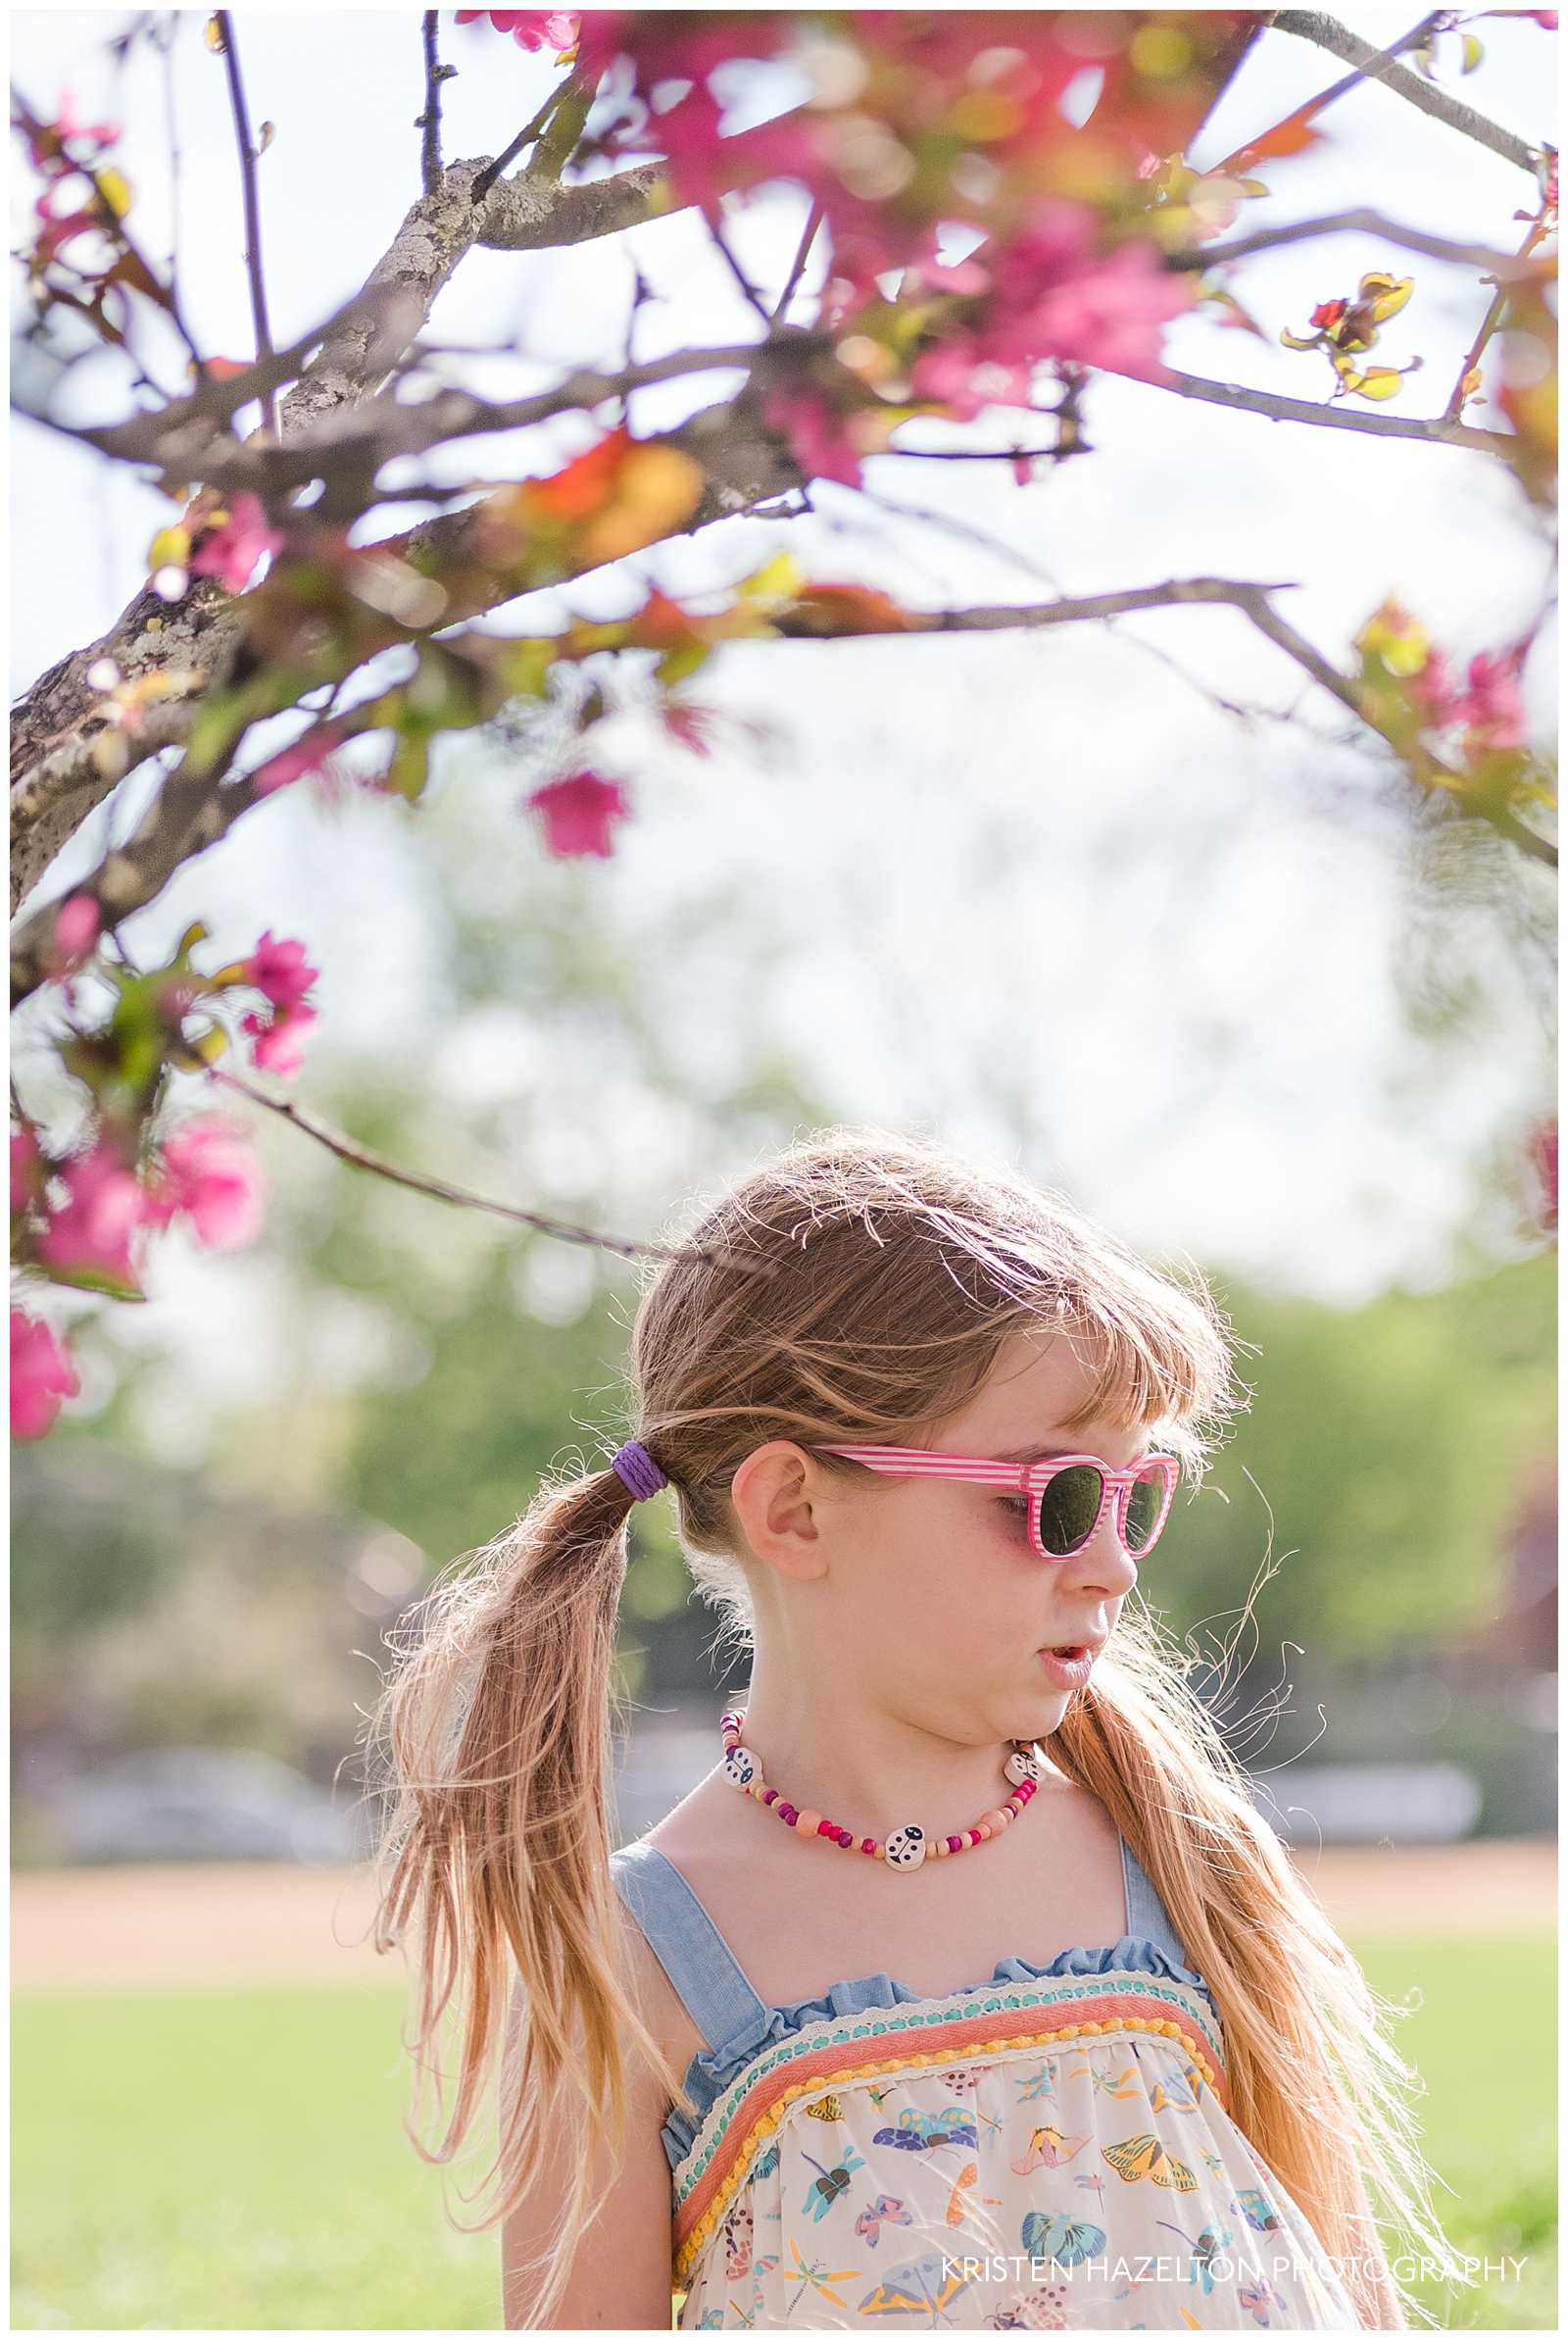 Young girl with pink sunglasses underneath a crabapple tree with pink blossoms